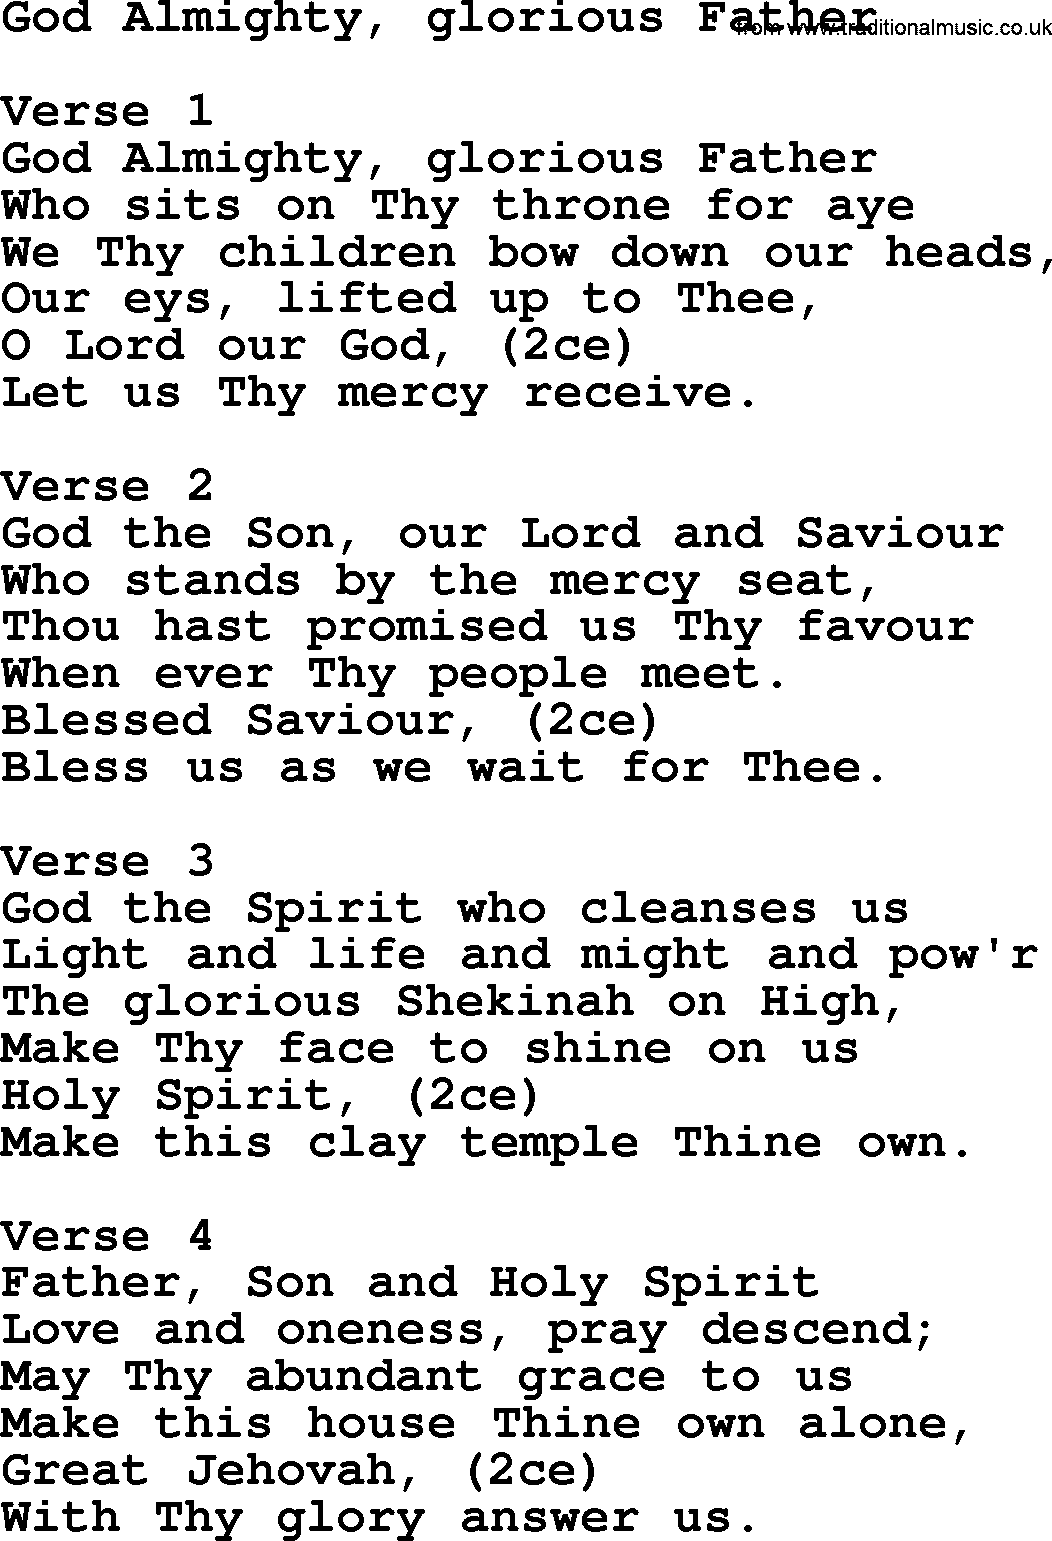 Apostolic and Pentecostal Hymns and Gospel Songs, Hymn: God Almighty, Glorious Father, Christian lyrics and PDF